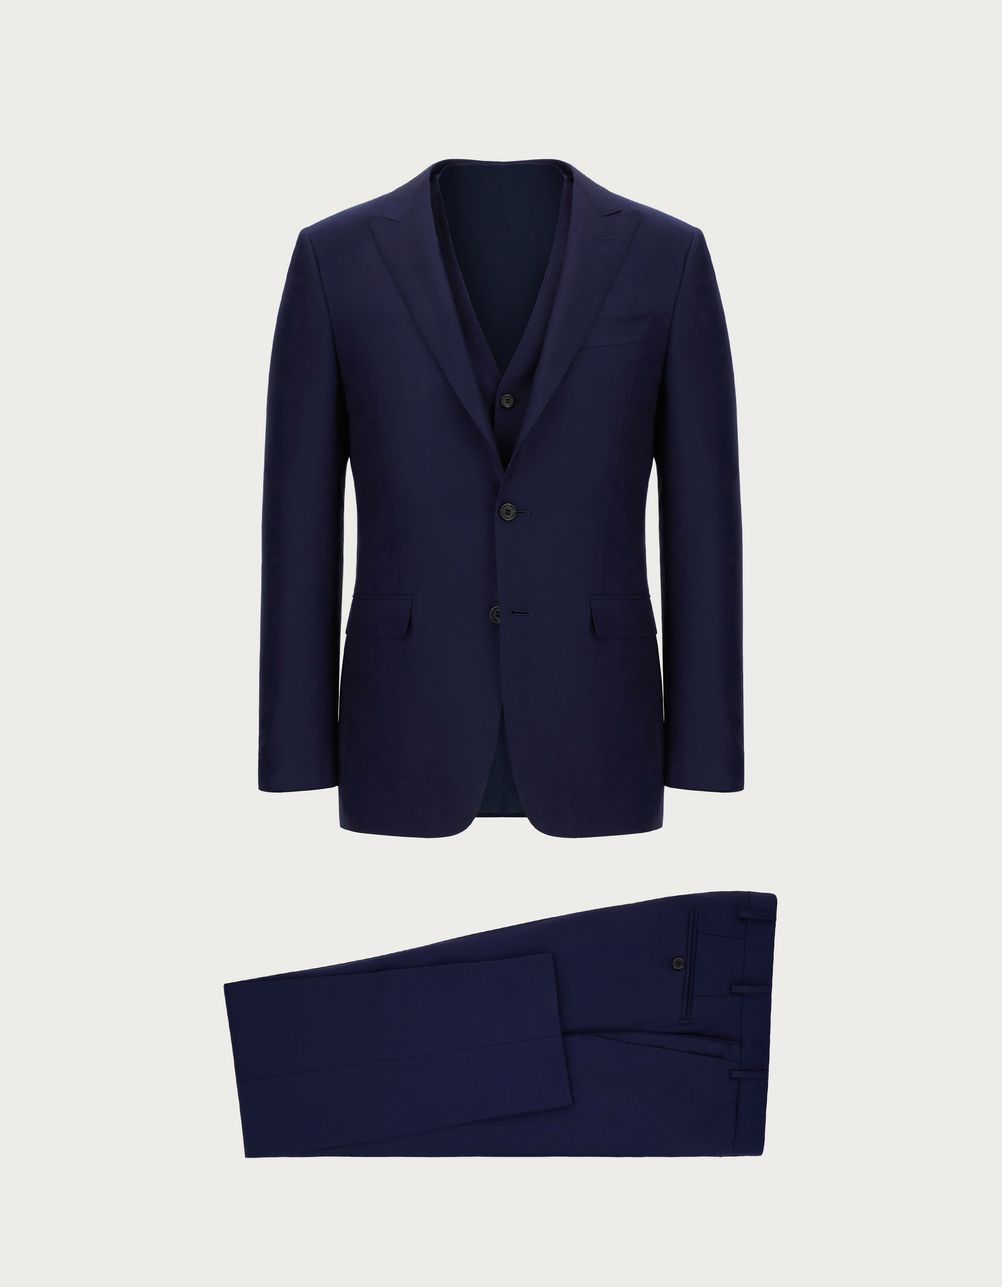 Blue wool suit with waistcoat